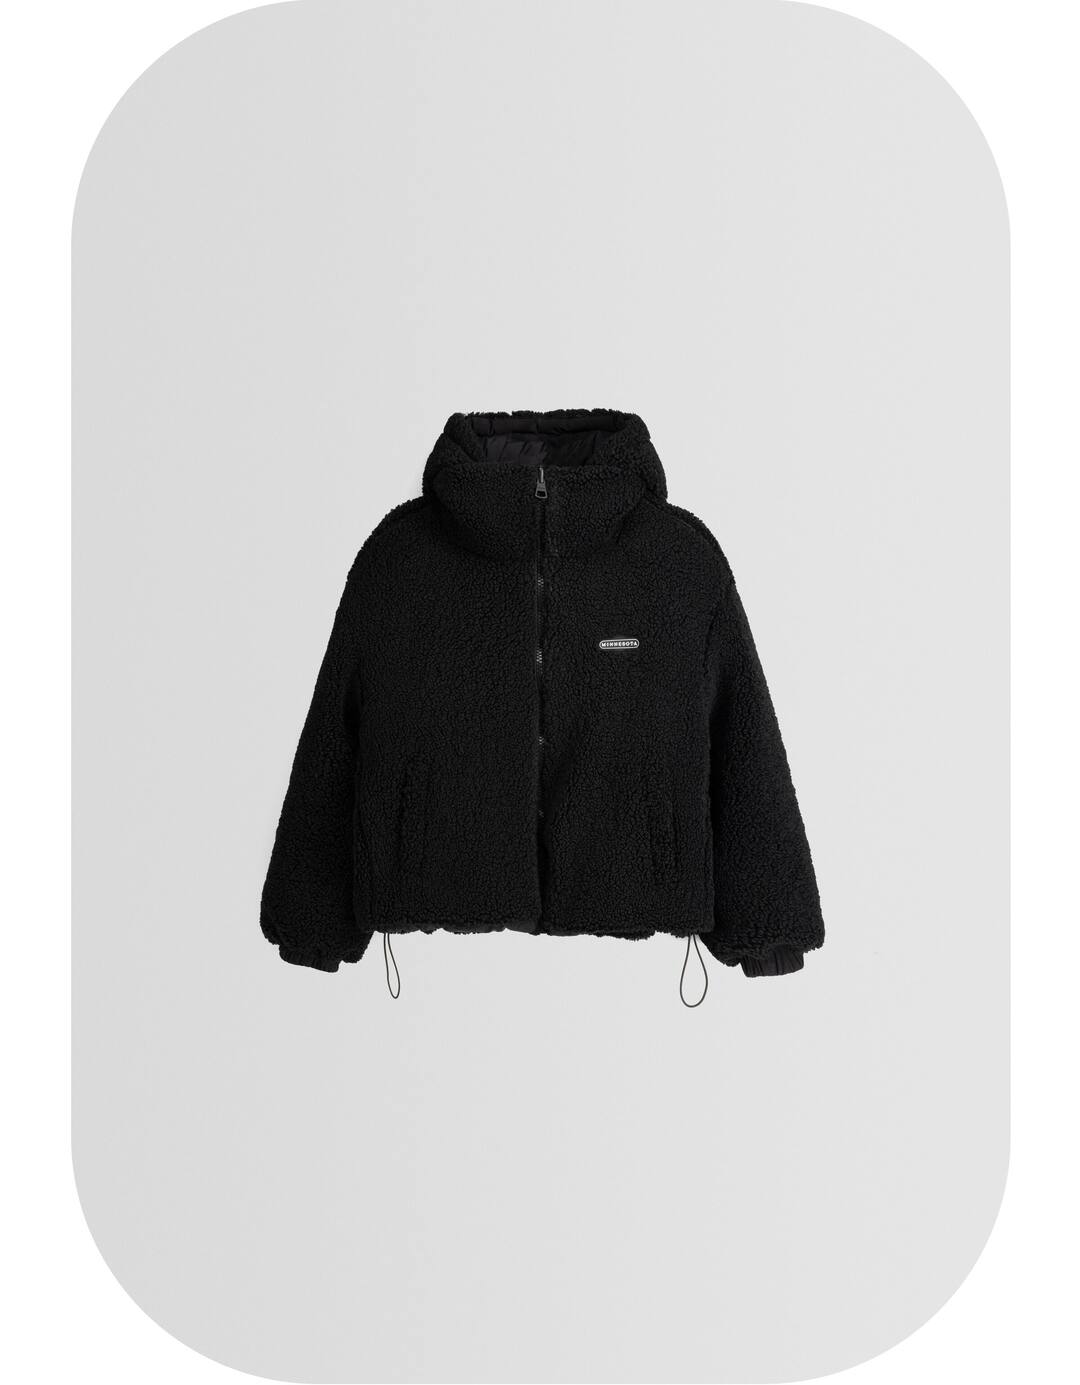 Reversible hoodie nylon blend jacket with faux shearling